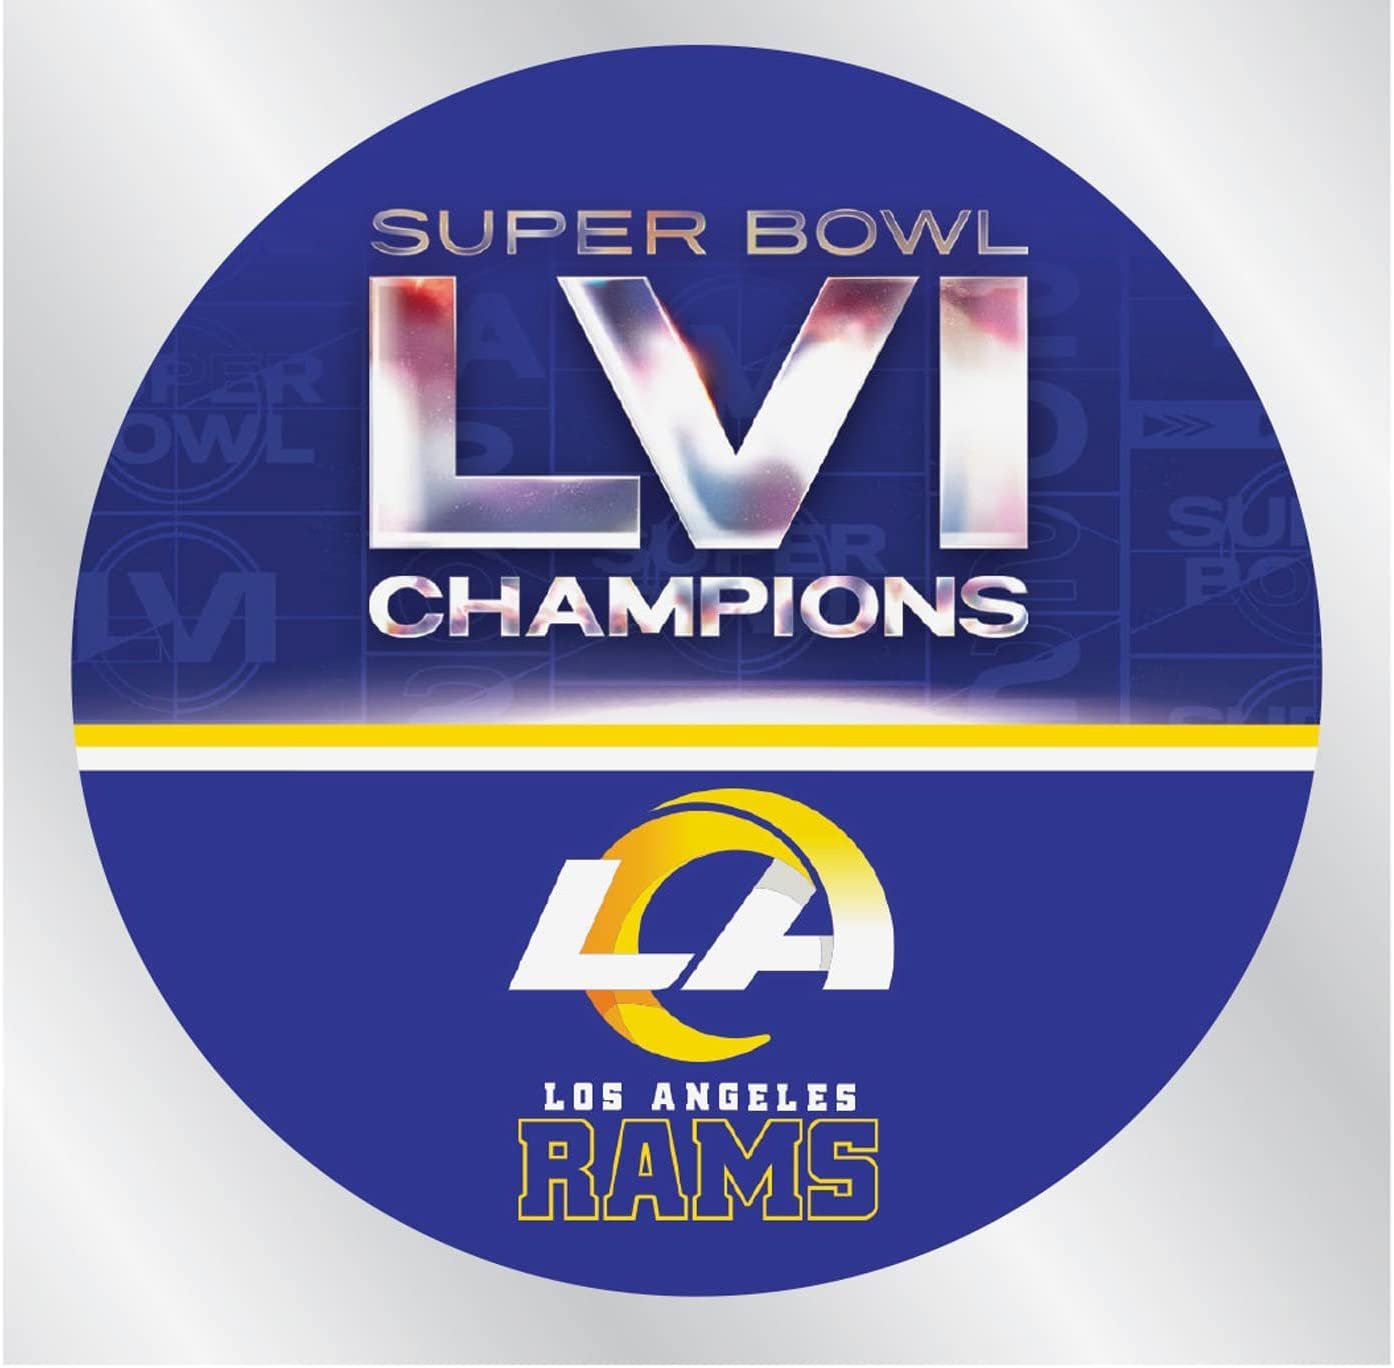 LOS ANGELES RAMS 2021 NFC CONFERENCE CHAMPS 8X8 DIE CUT DECAL